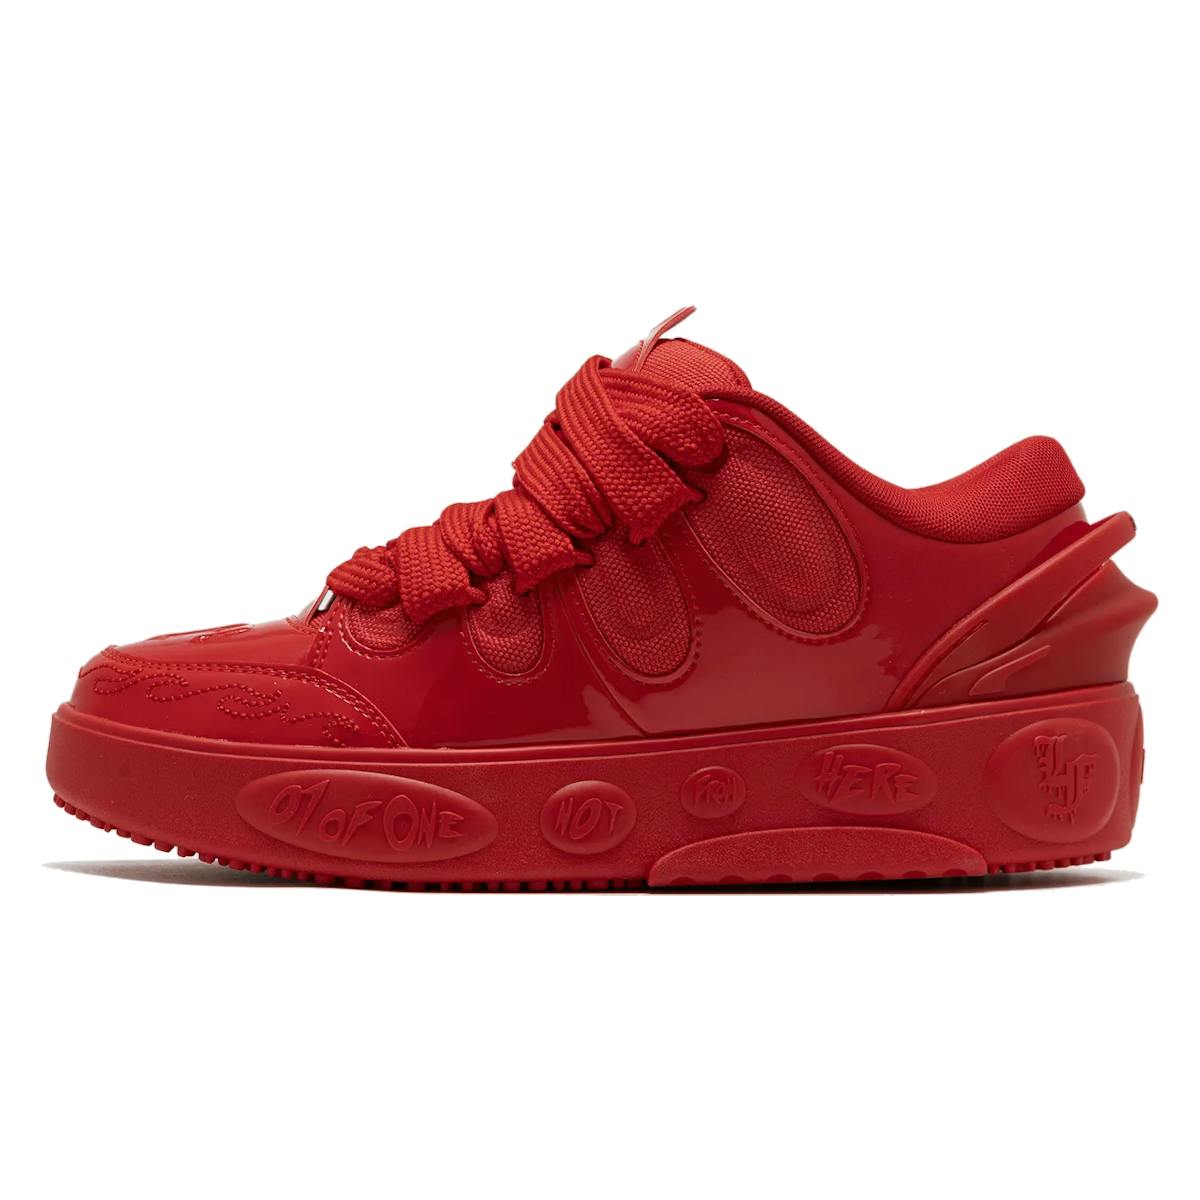 Puma LaFrancé Amour "For All Time Red"